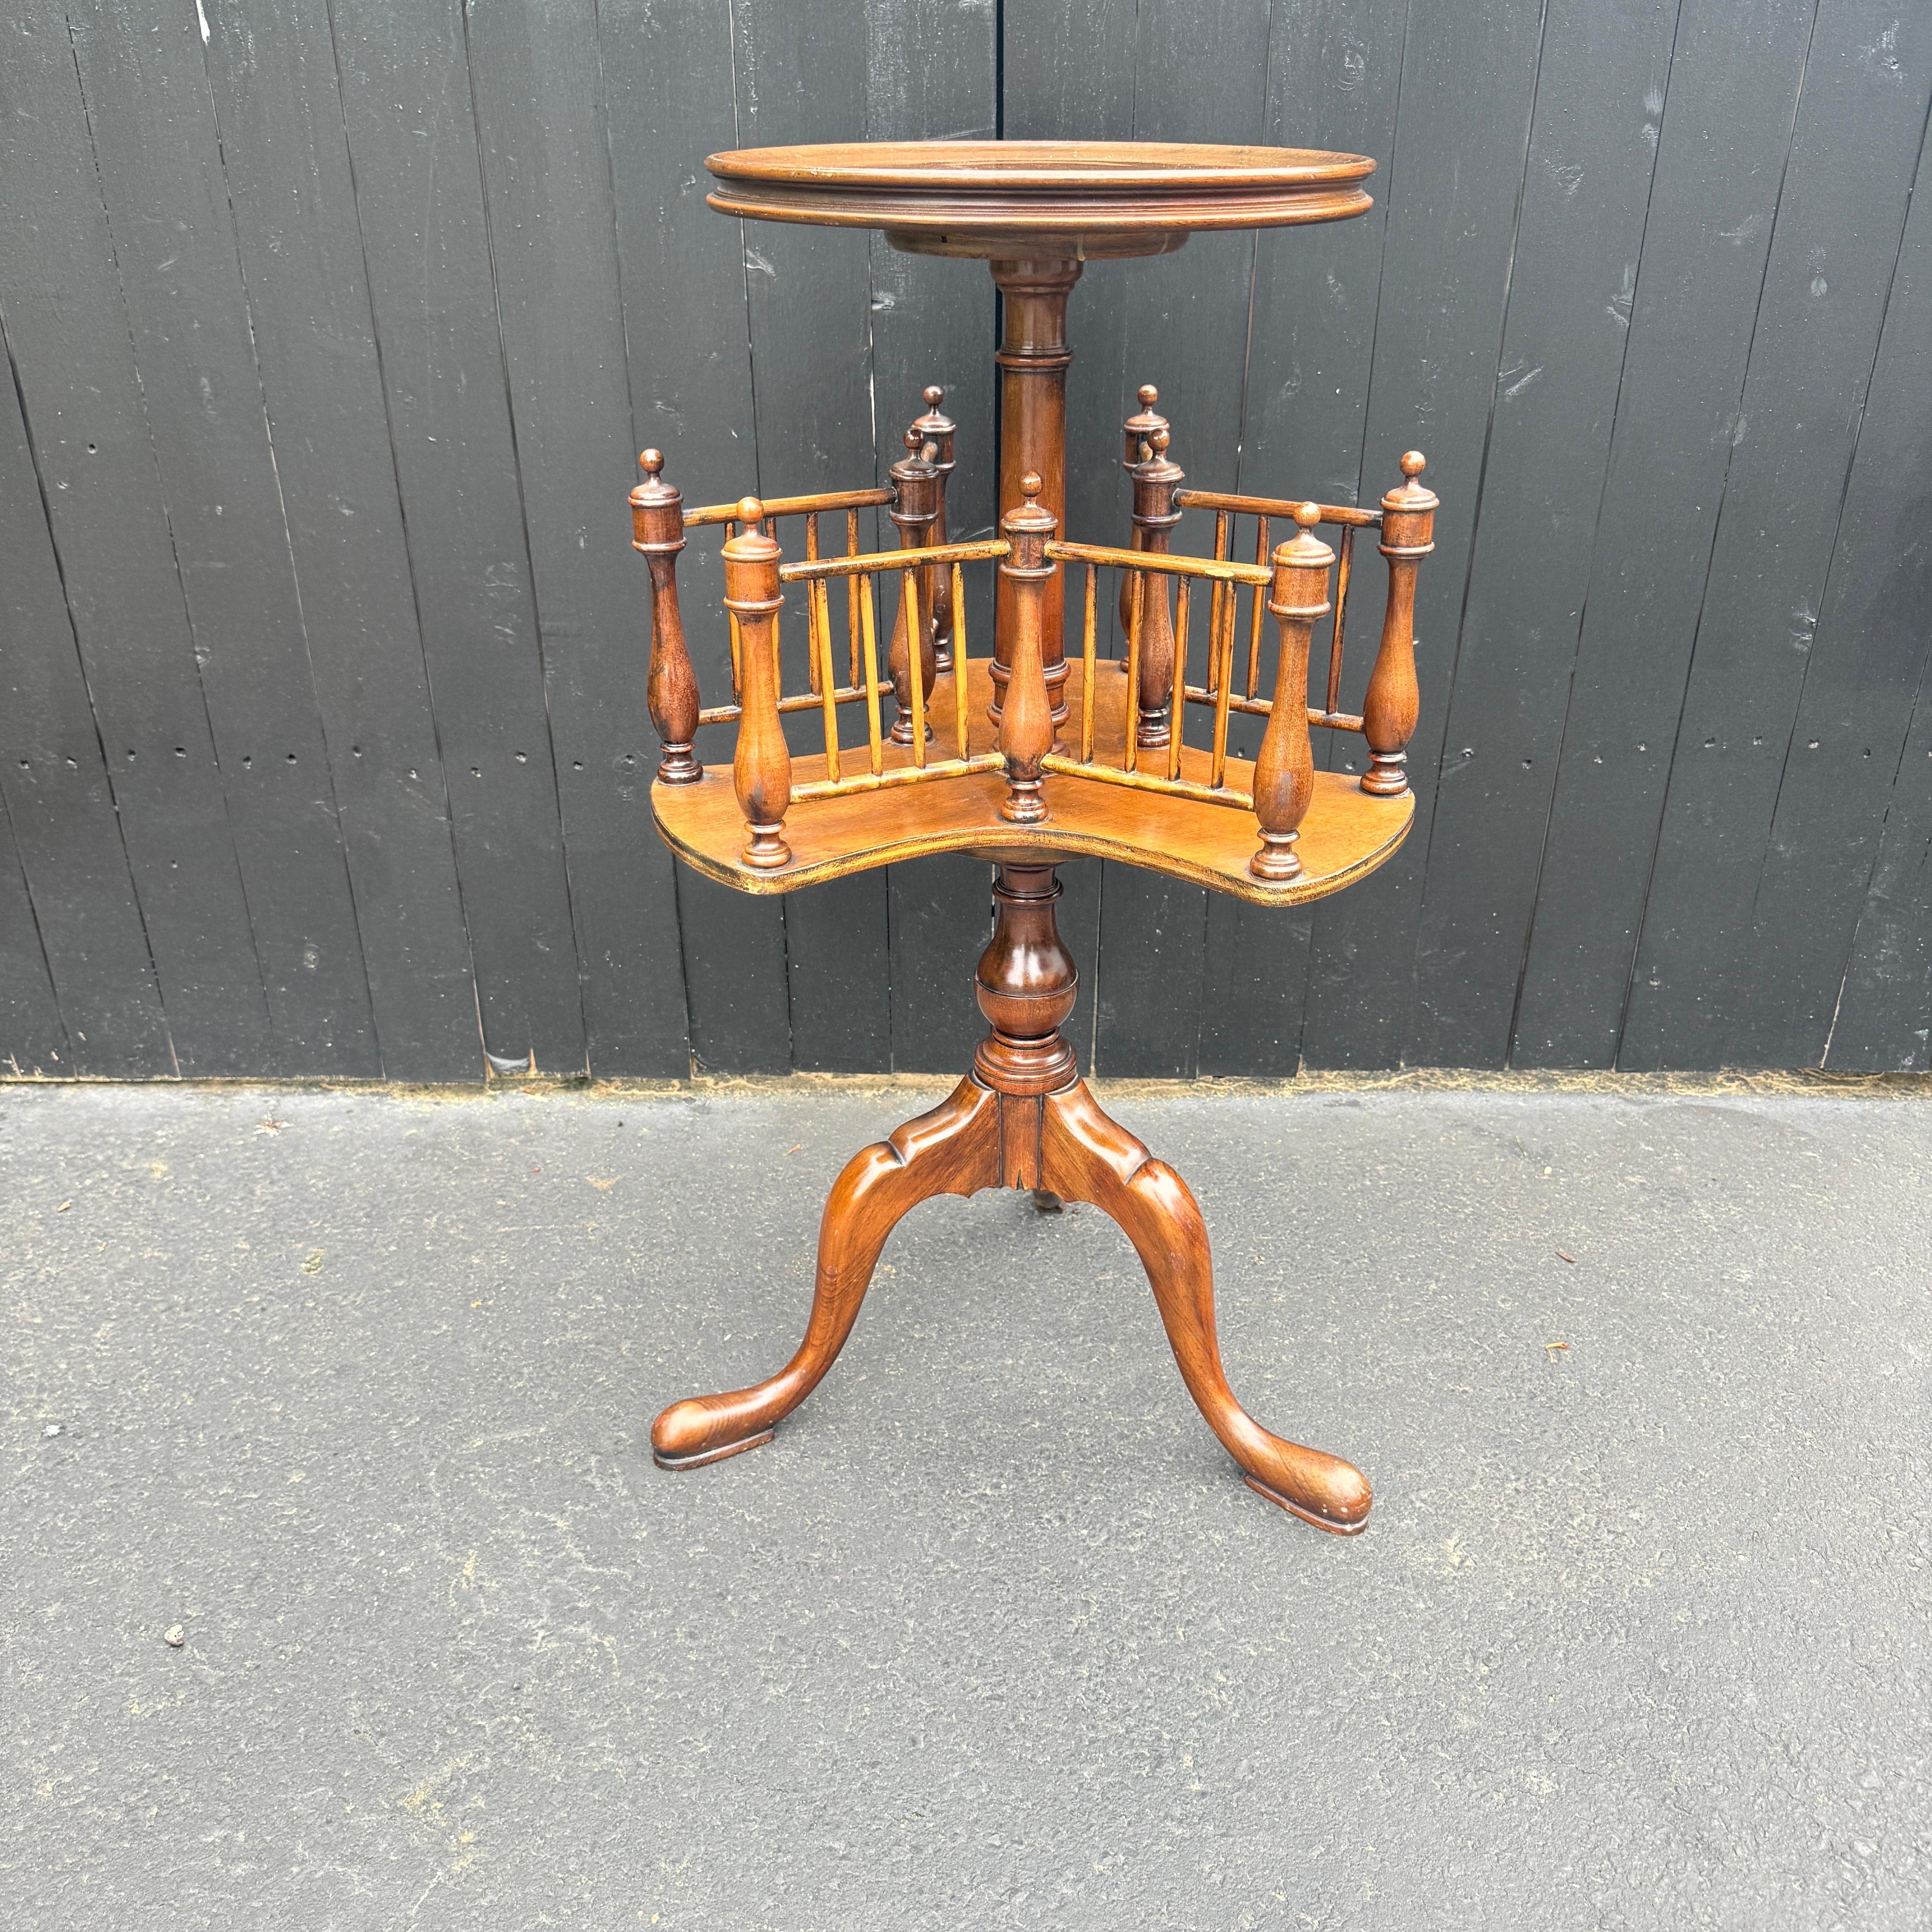 Wood revolving book table with circular top and molded edge. This revolving bookshelf with dividers is raised up on a tripod base. Fantastic vintage piece that could be used in a living room setting as well as next to your favorite leather chair in